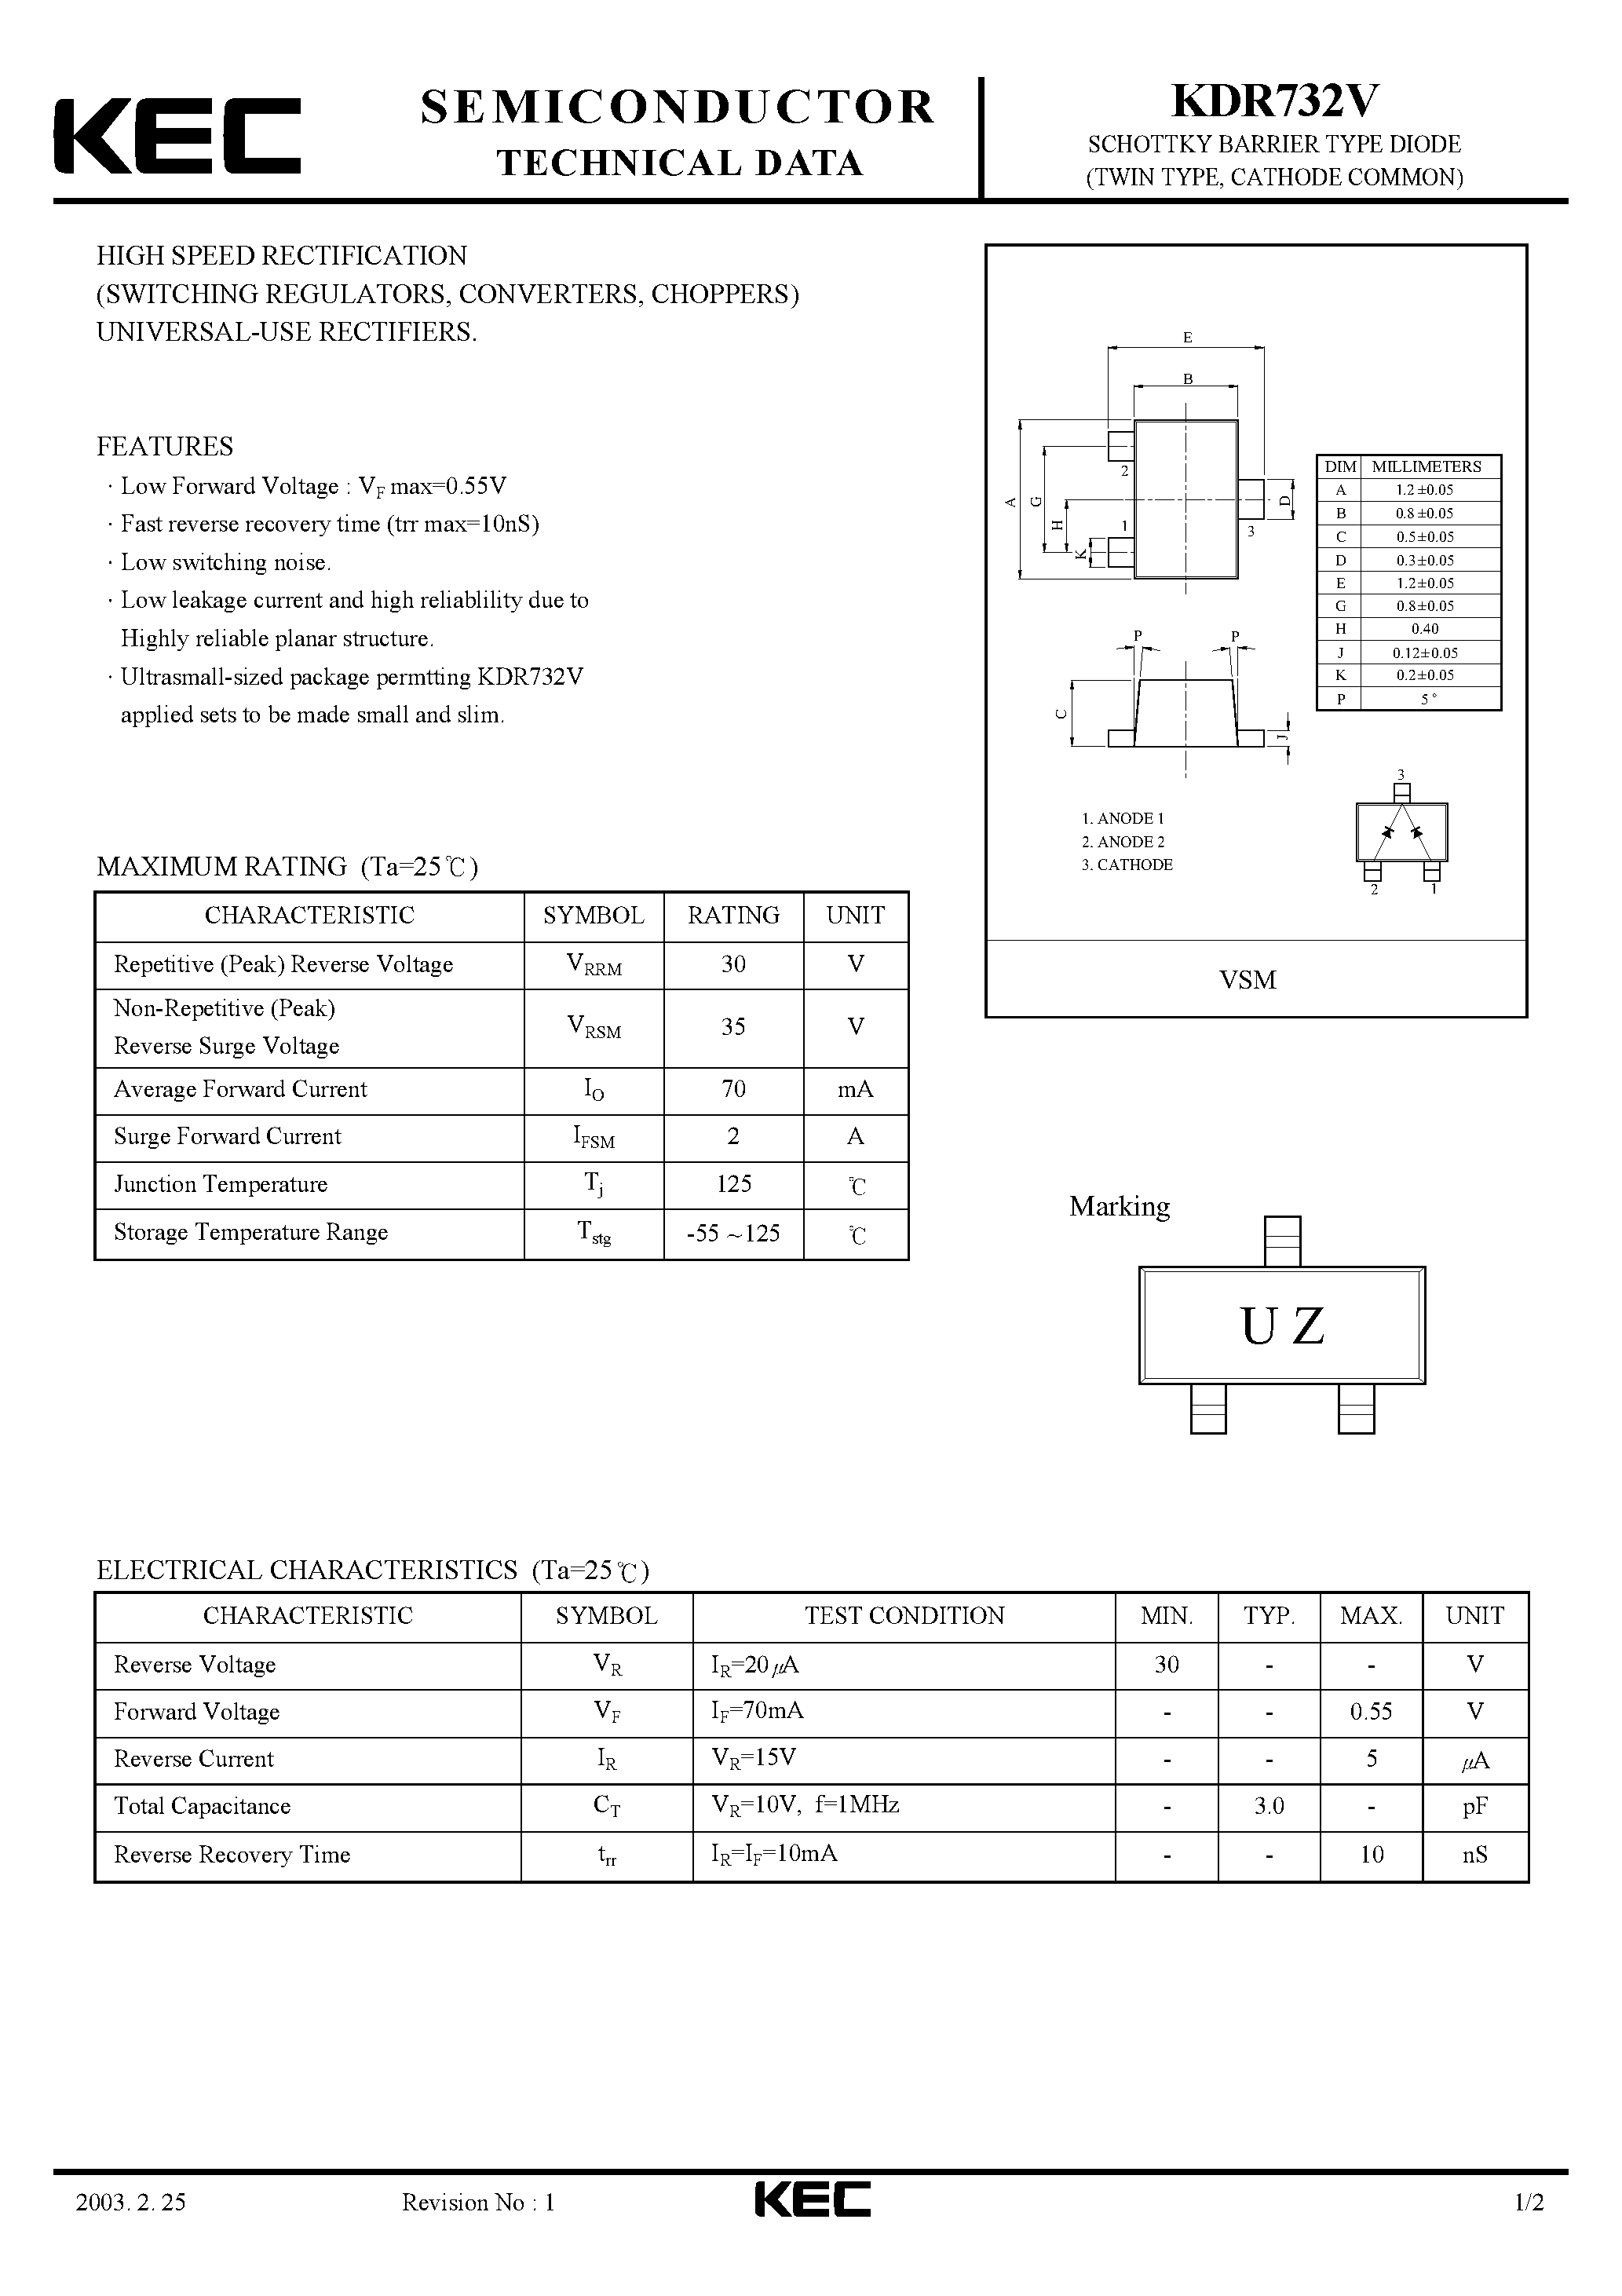 Datasheet KDR732V - SCHOTTKY BARRIER TYPE DIODE (TWIN TYPE/ CATHODE COMMON) page 1